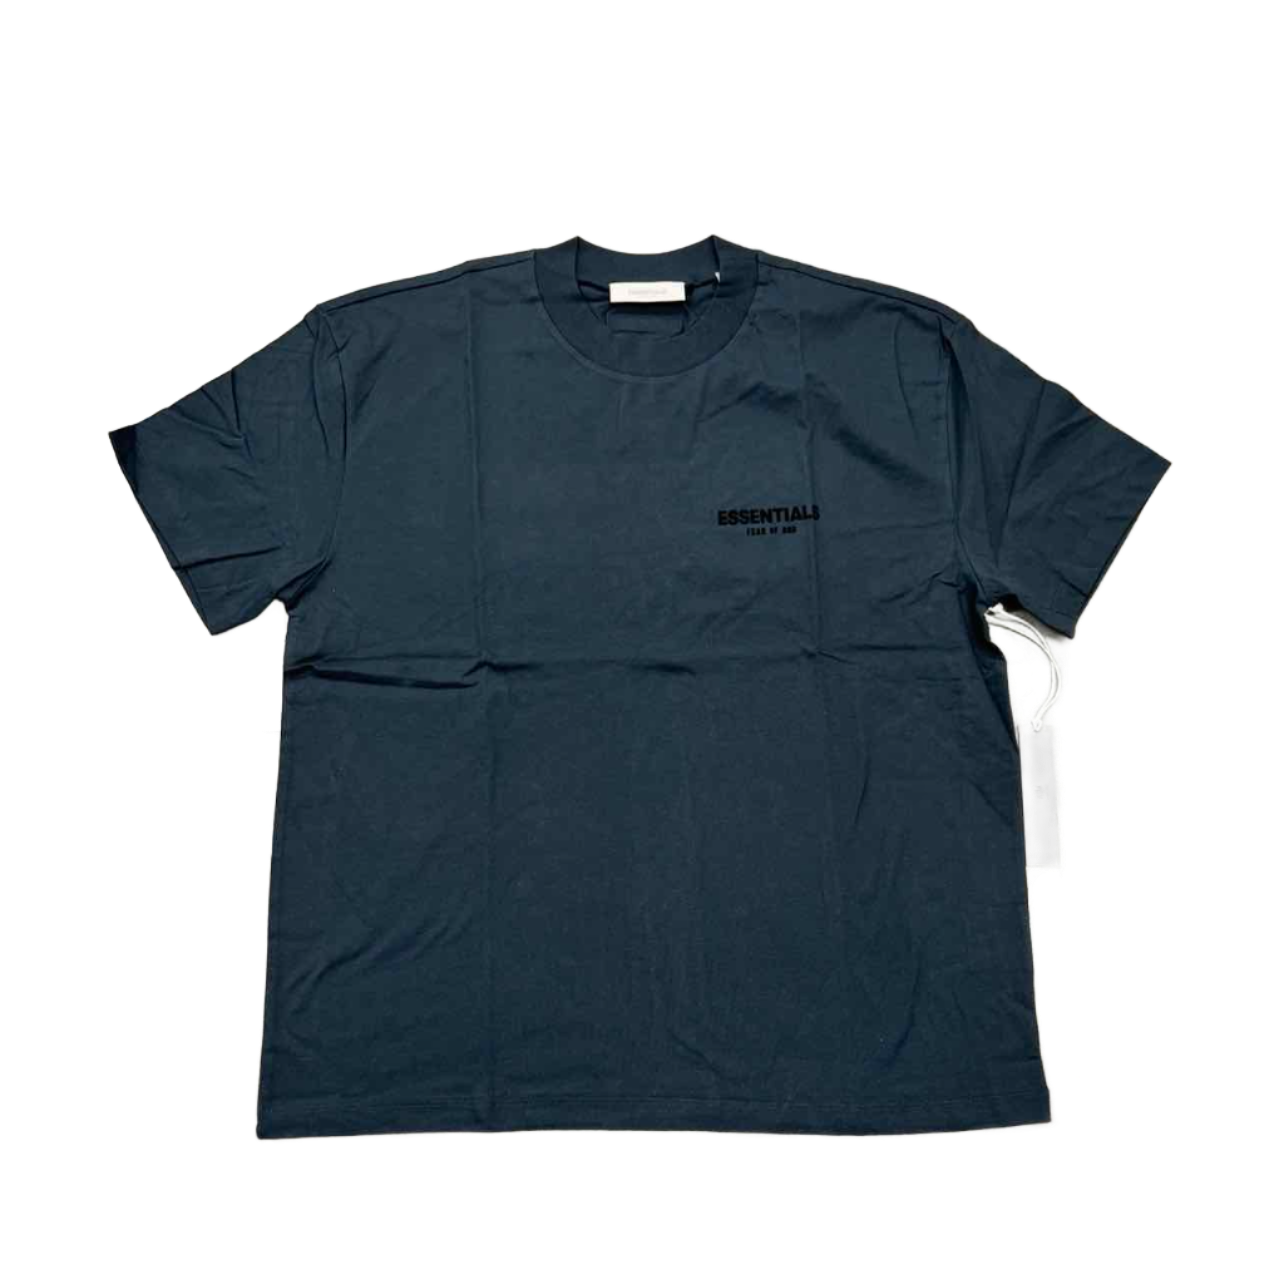 Fear of God T-Shirt "ESSENTIALS" Stretch Limo New Size 2XL